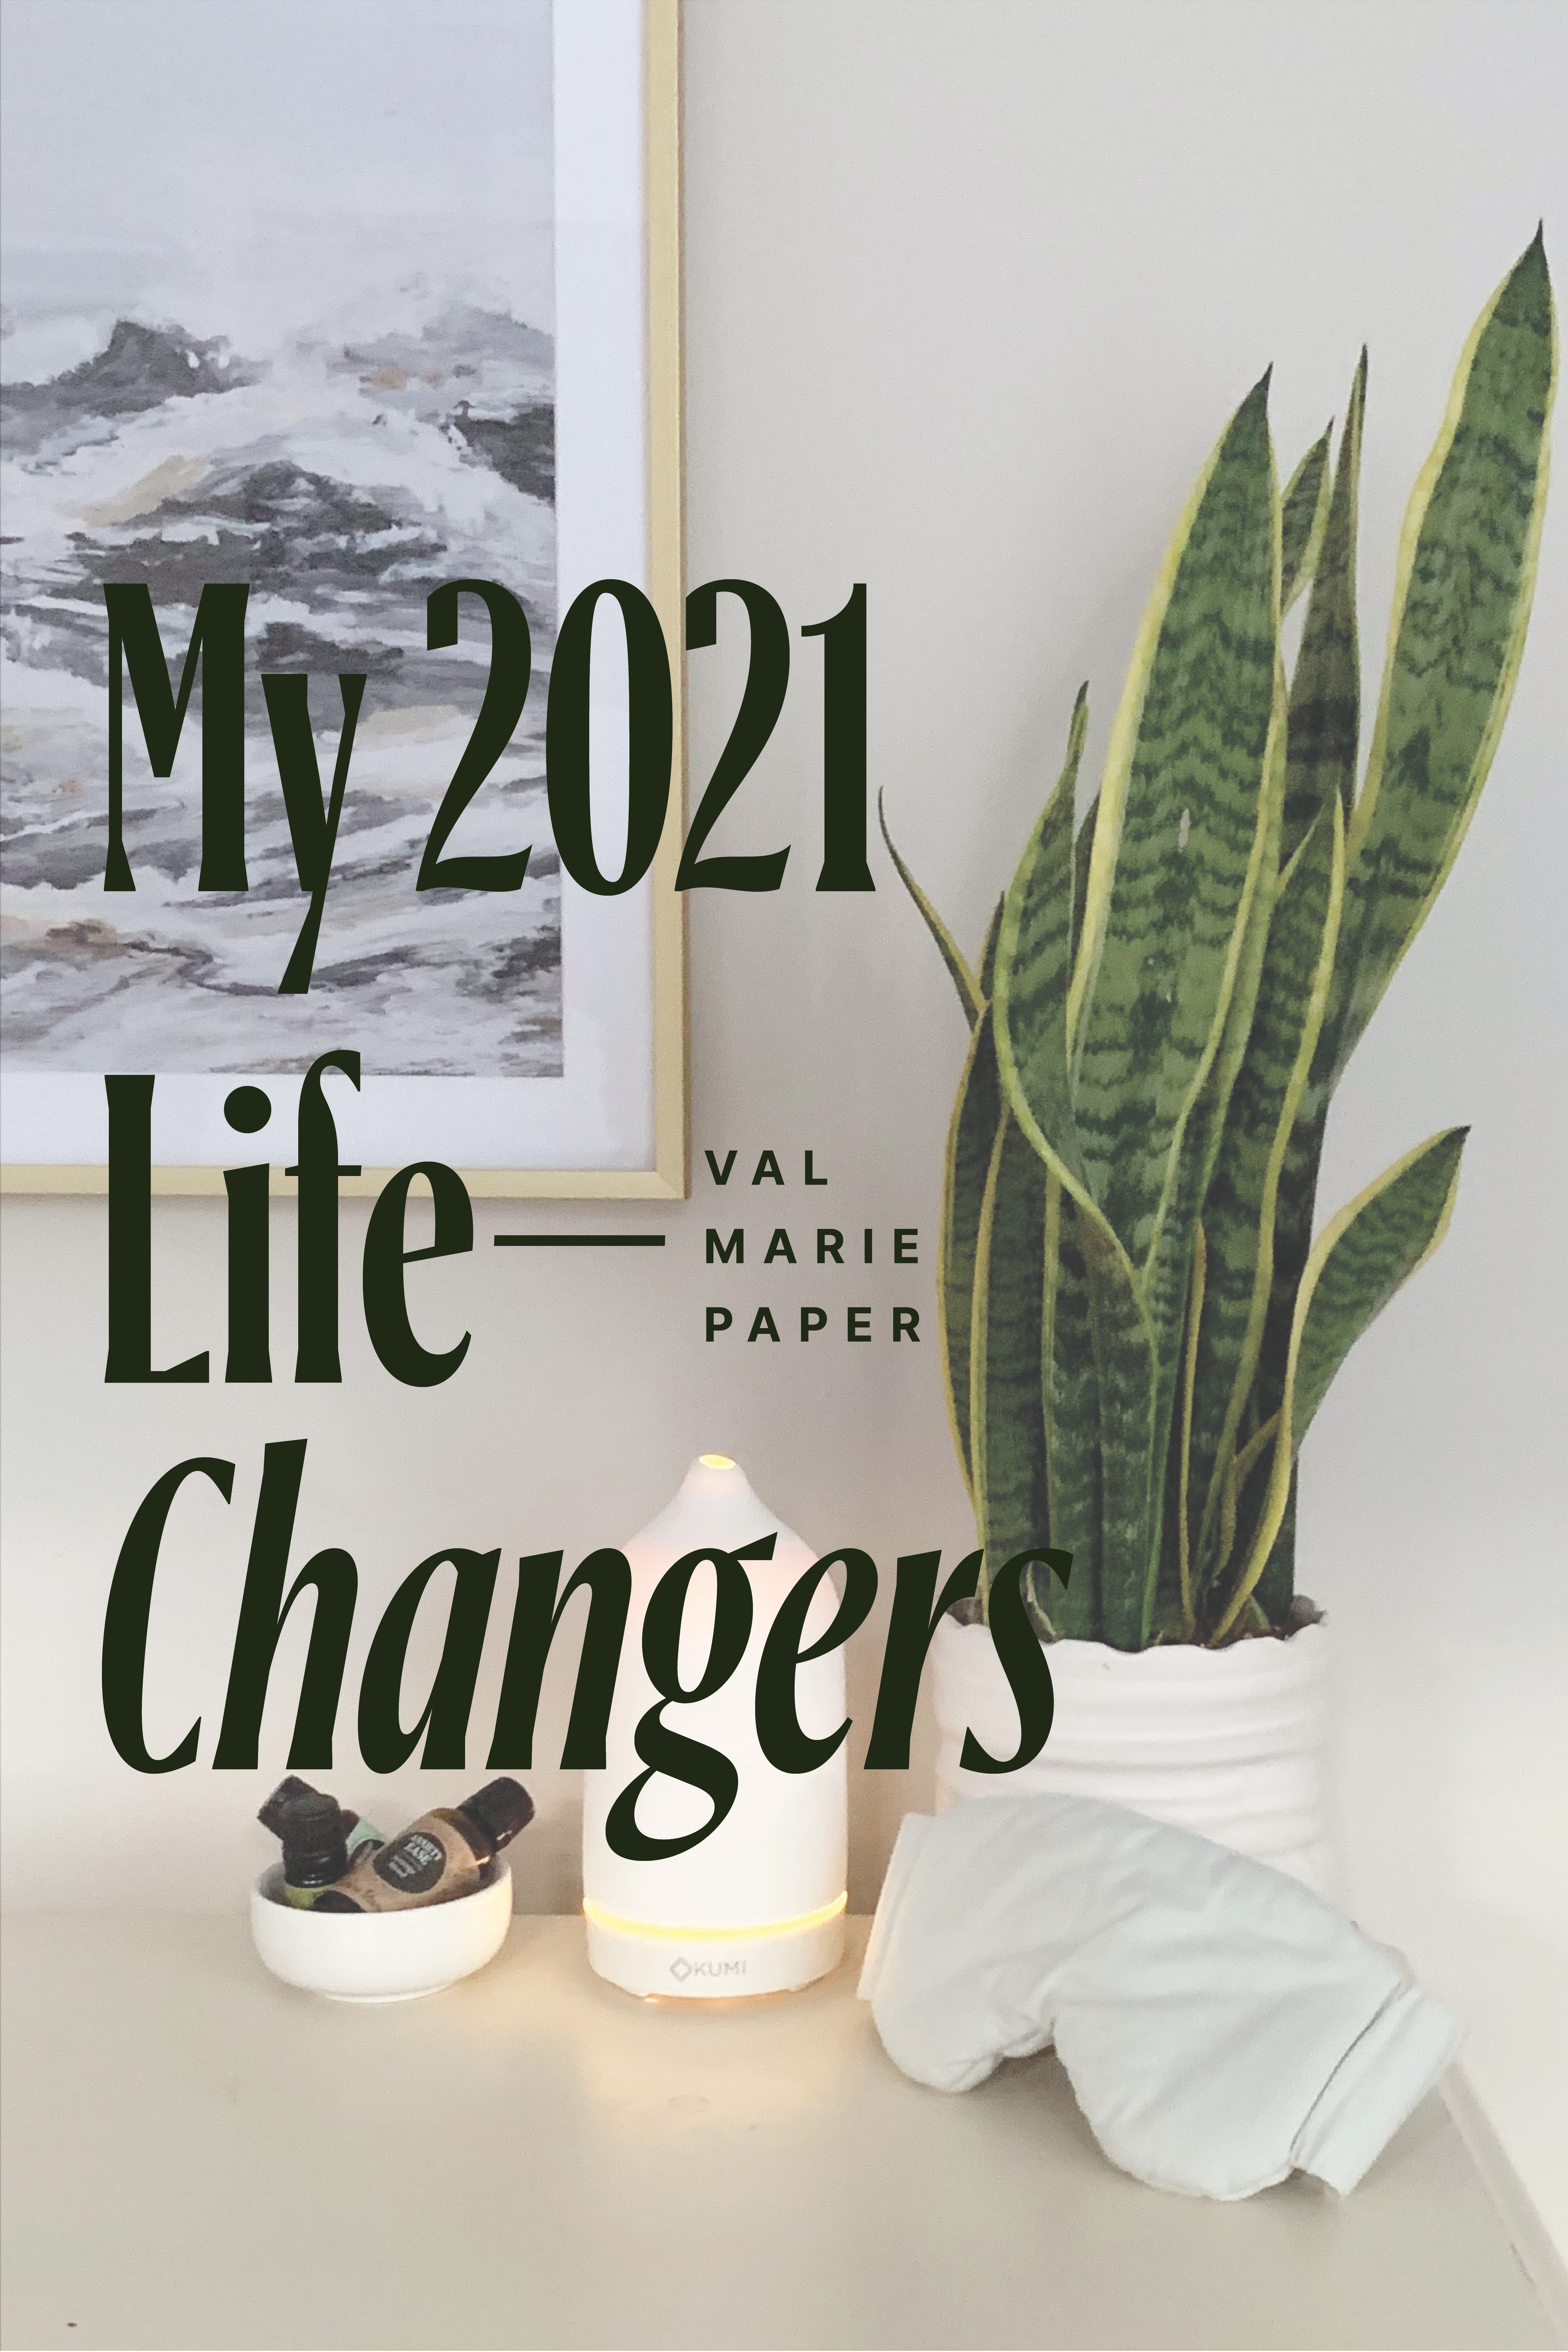 2021 Life-Changers by Valerie Woerner, prayer journal, women's ministry, prayer, refresh, meditation, how to make a prayer journal, praying for your kids, husband, prayer warrior, war room, Bible study, tools, prayer notebook, how to pray, community, small group, bible study, 2021 life-changers, goals, annual goals